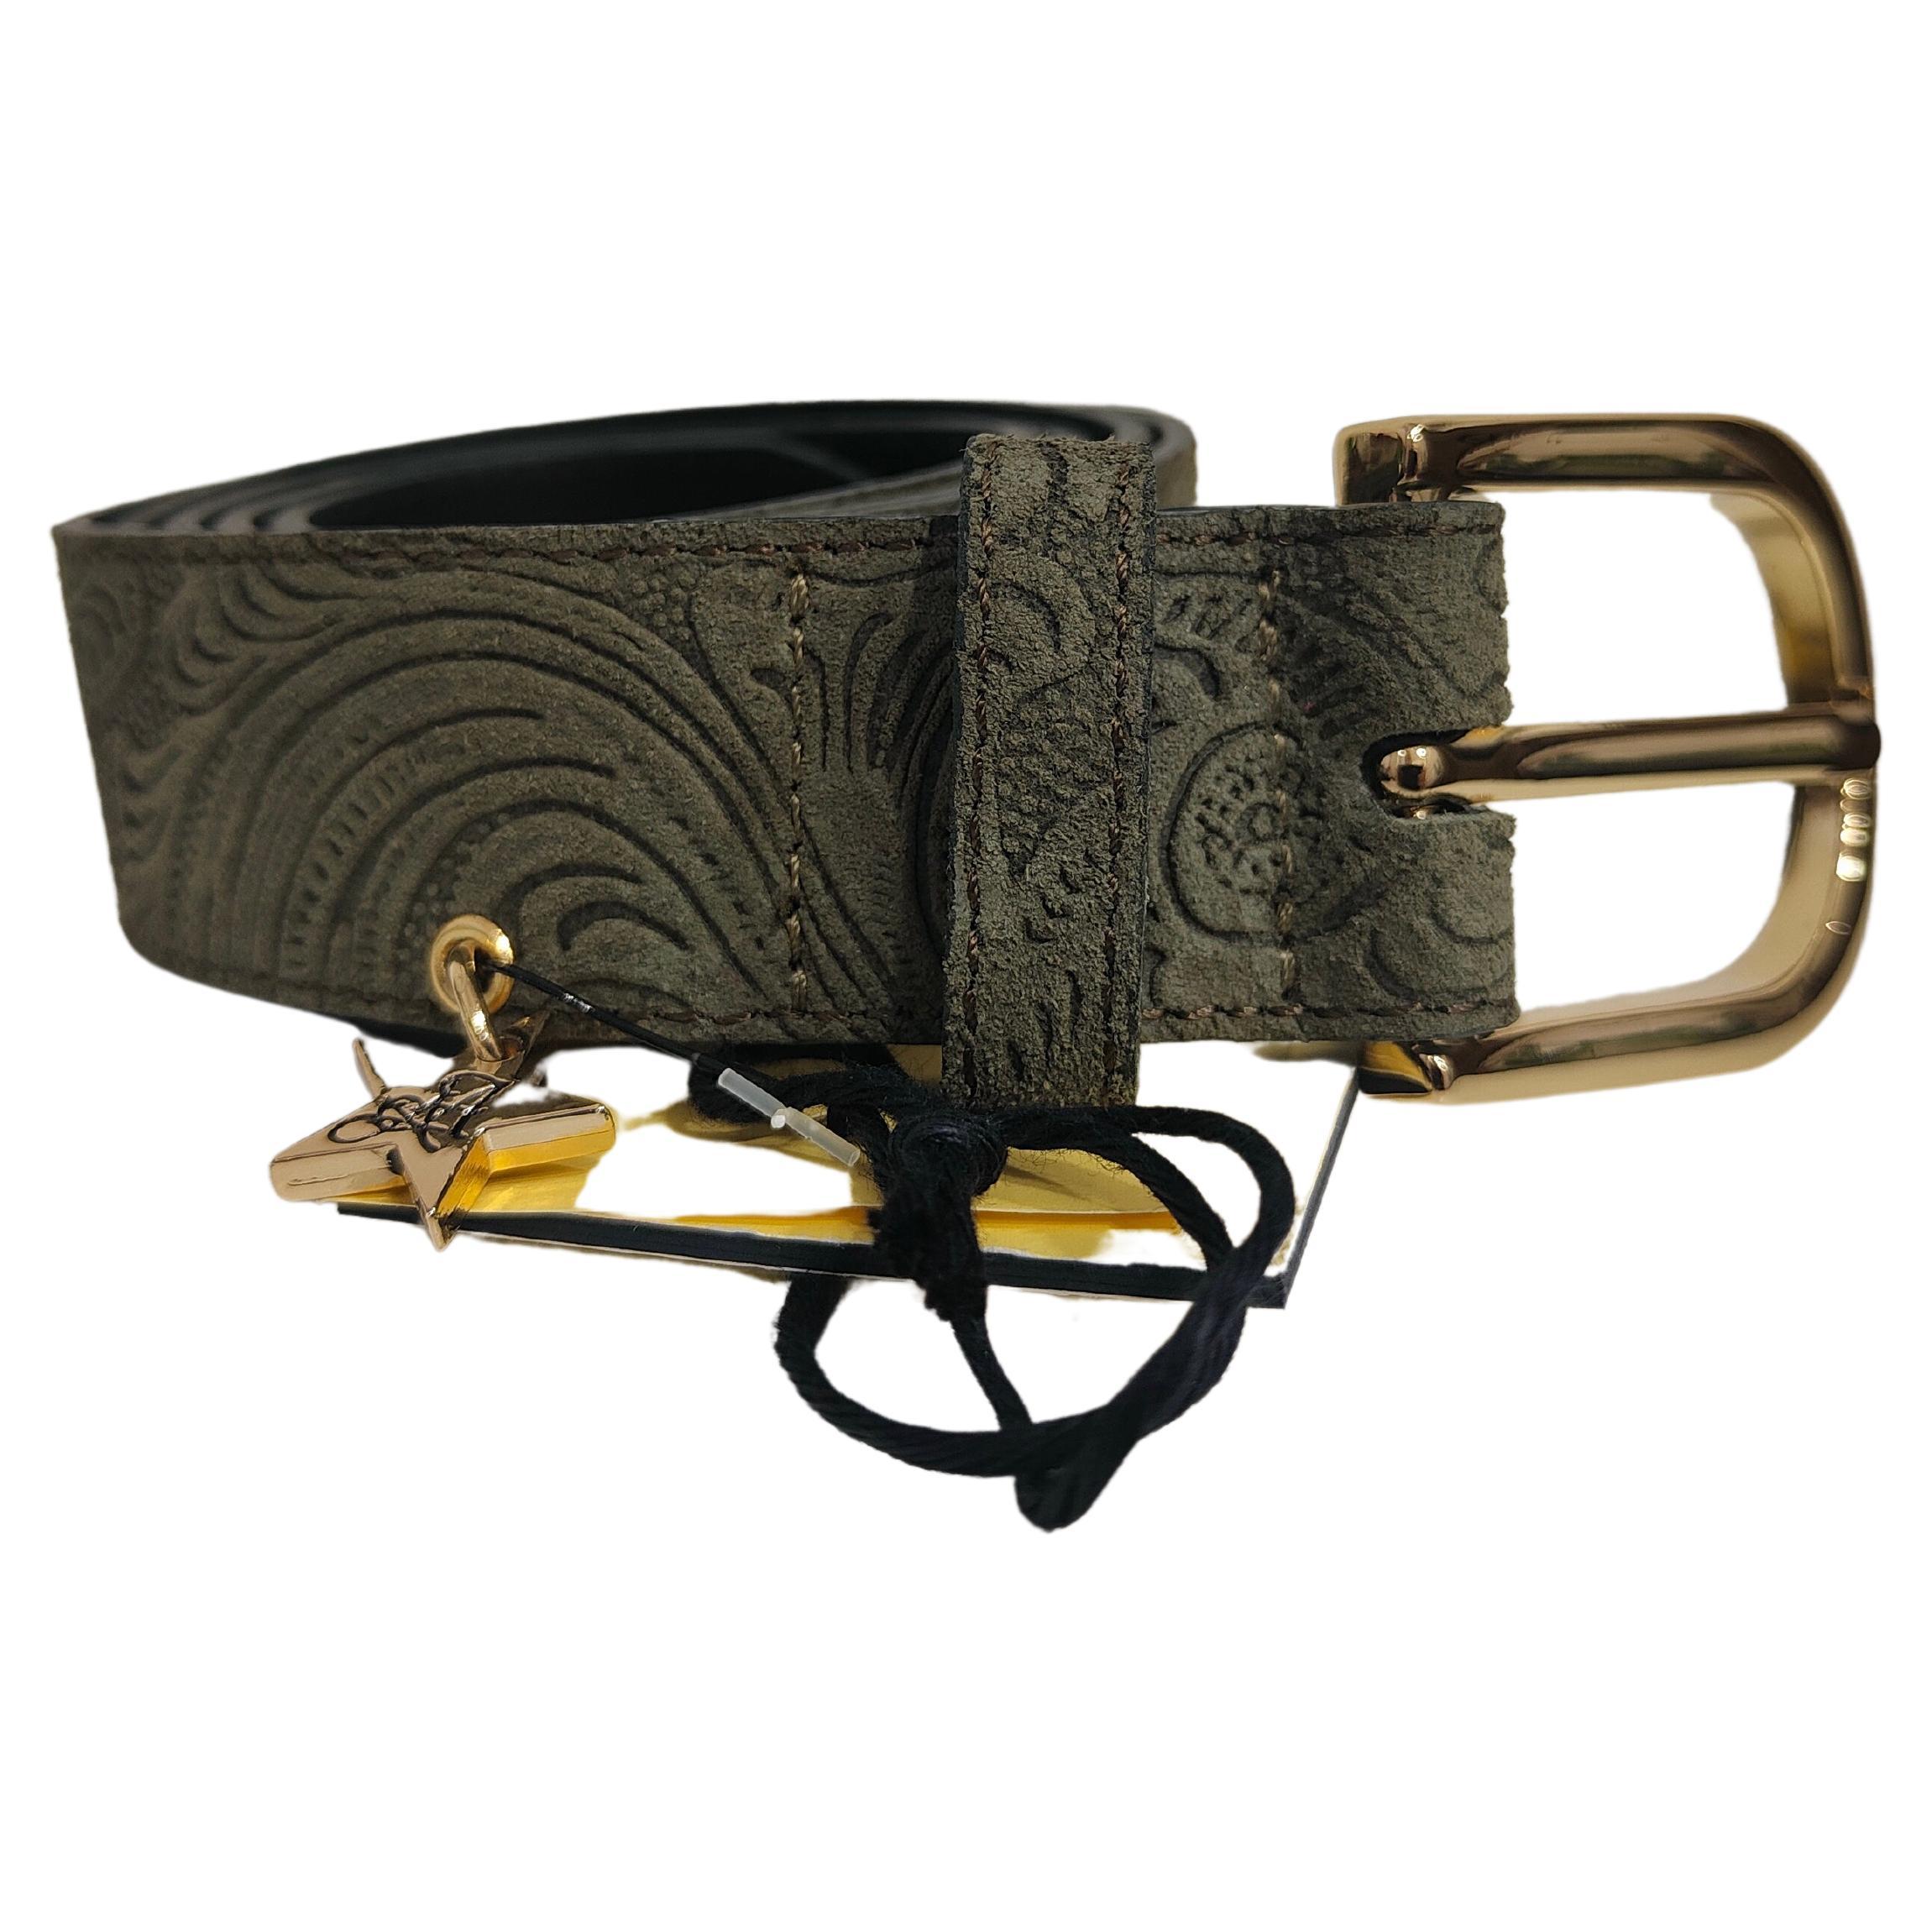 Louis Vuitton LV Dove 40MM Reversible Belt Brown in Coated Canvas/Leather  with Gold-tone - GB